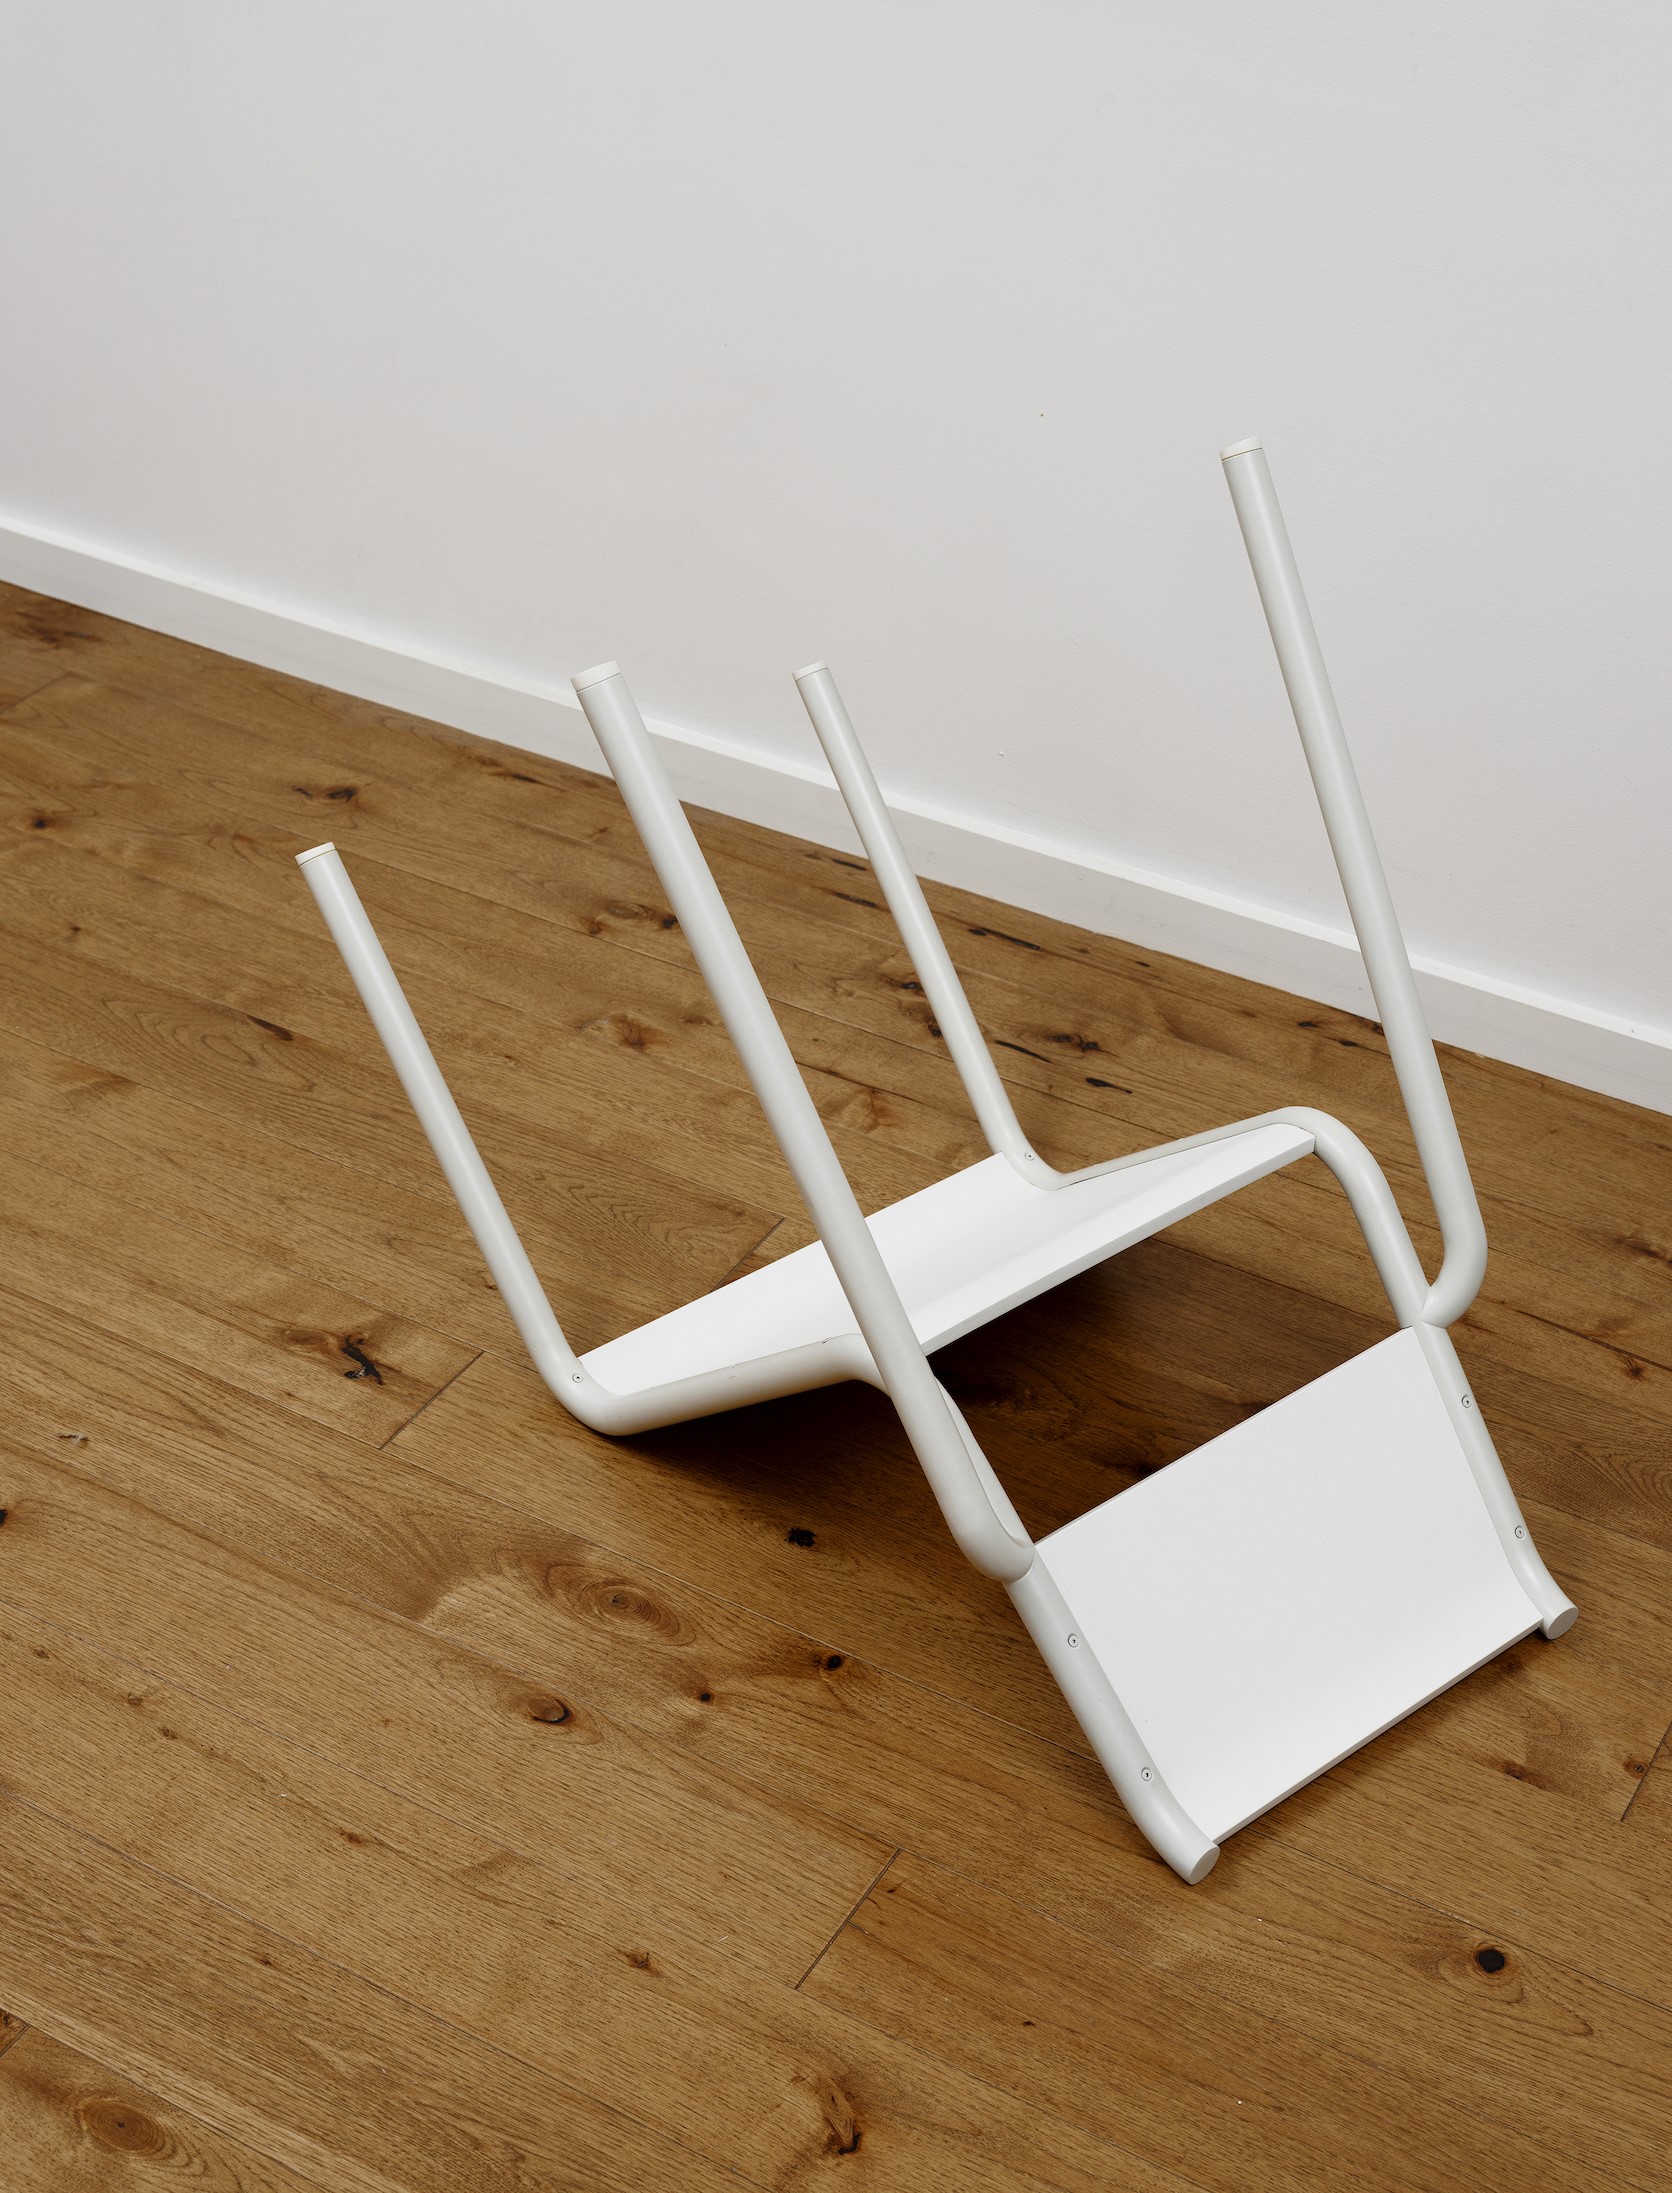 Minimalist Collection of Furniture Pieces "Pal Series" by Jamie Wolfond